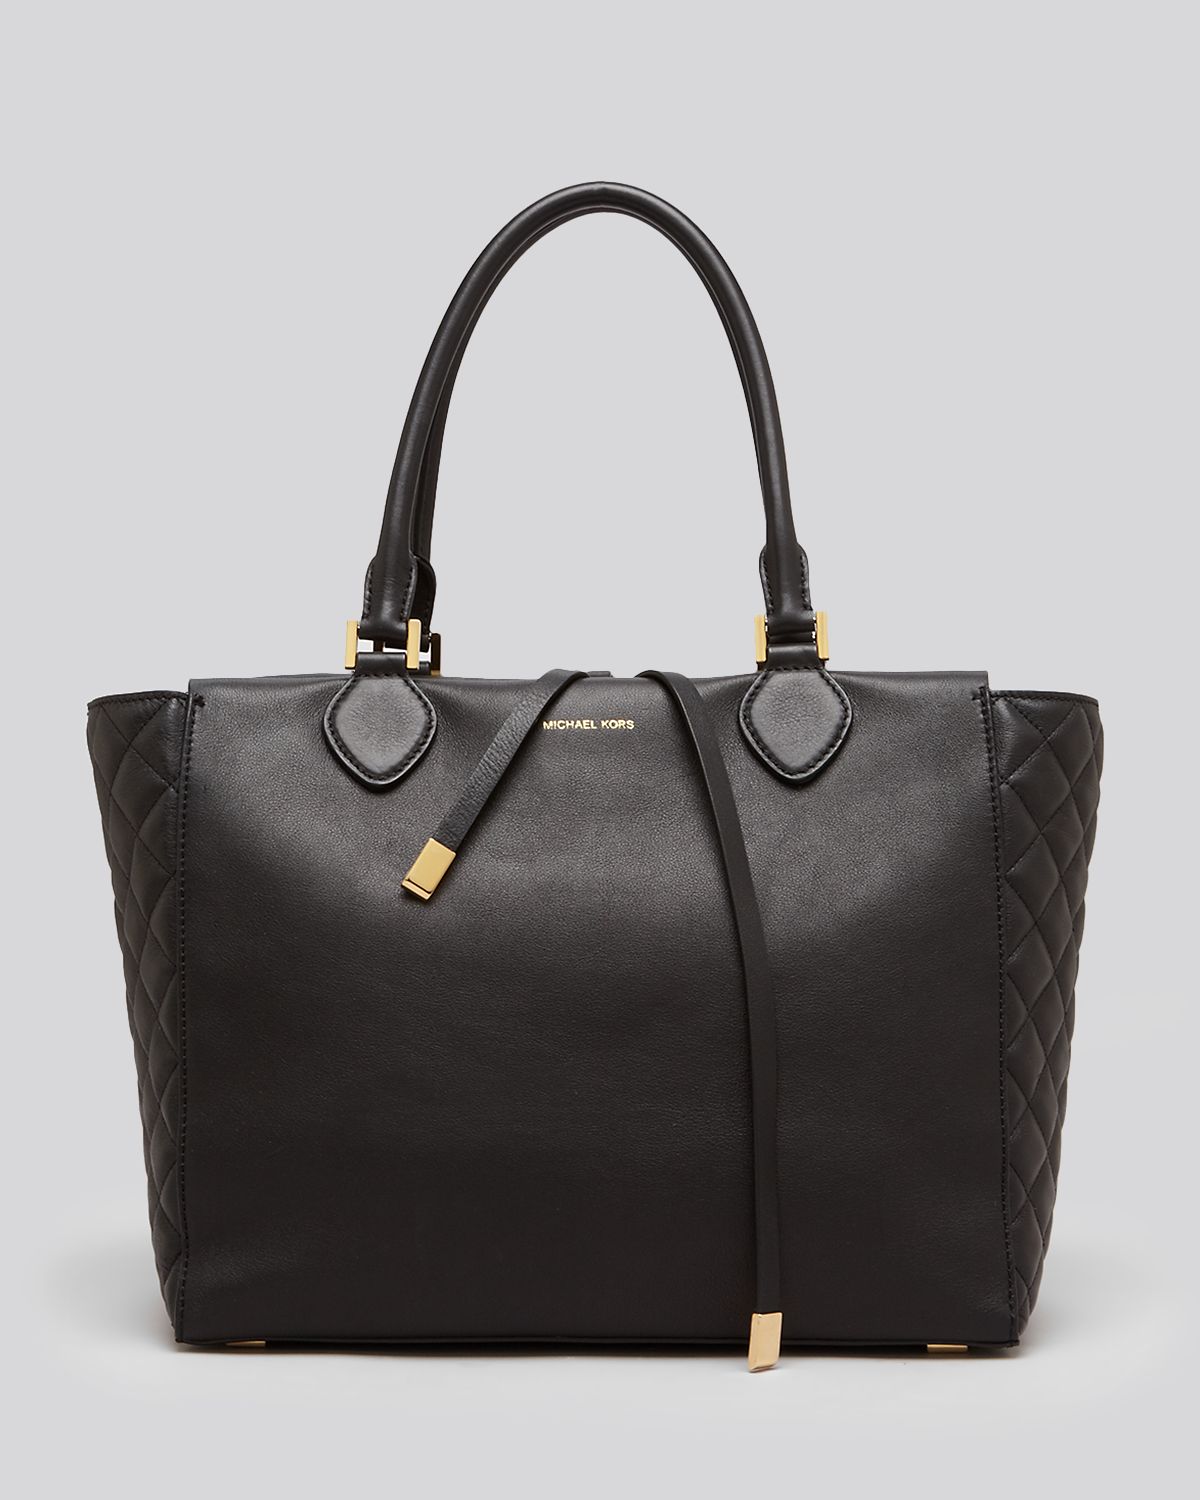 Lyst - Michael kors Tote Miranda Large Quilted in Black